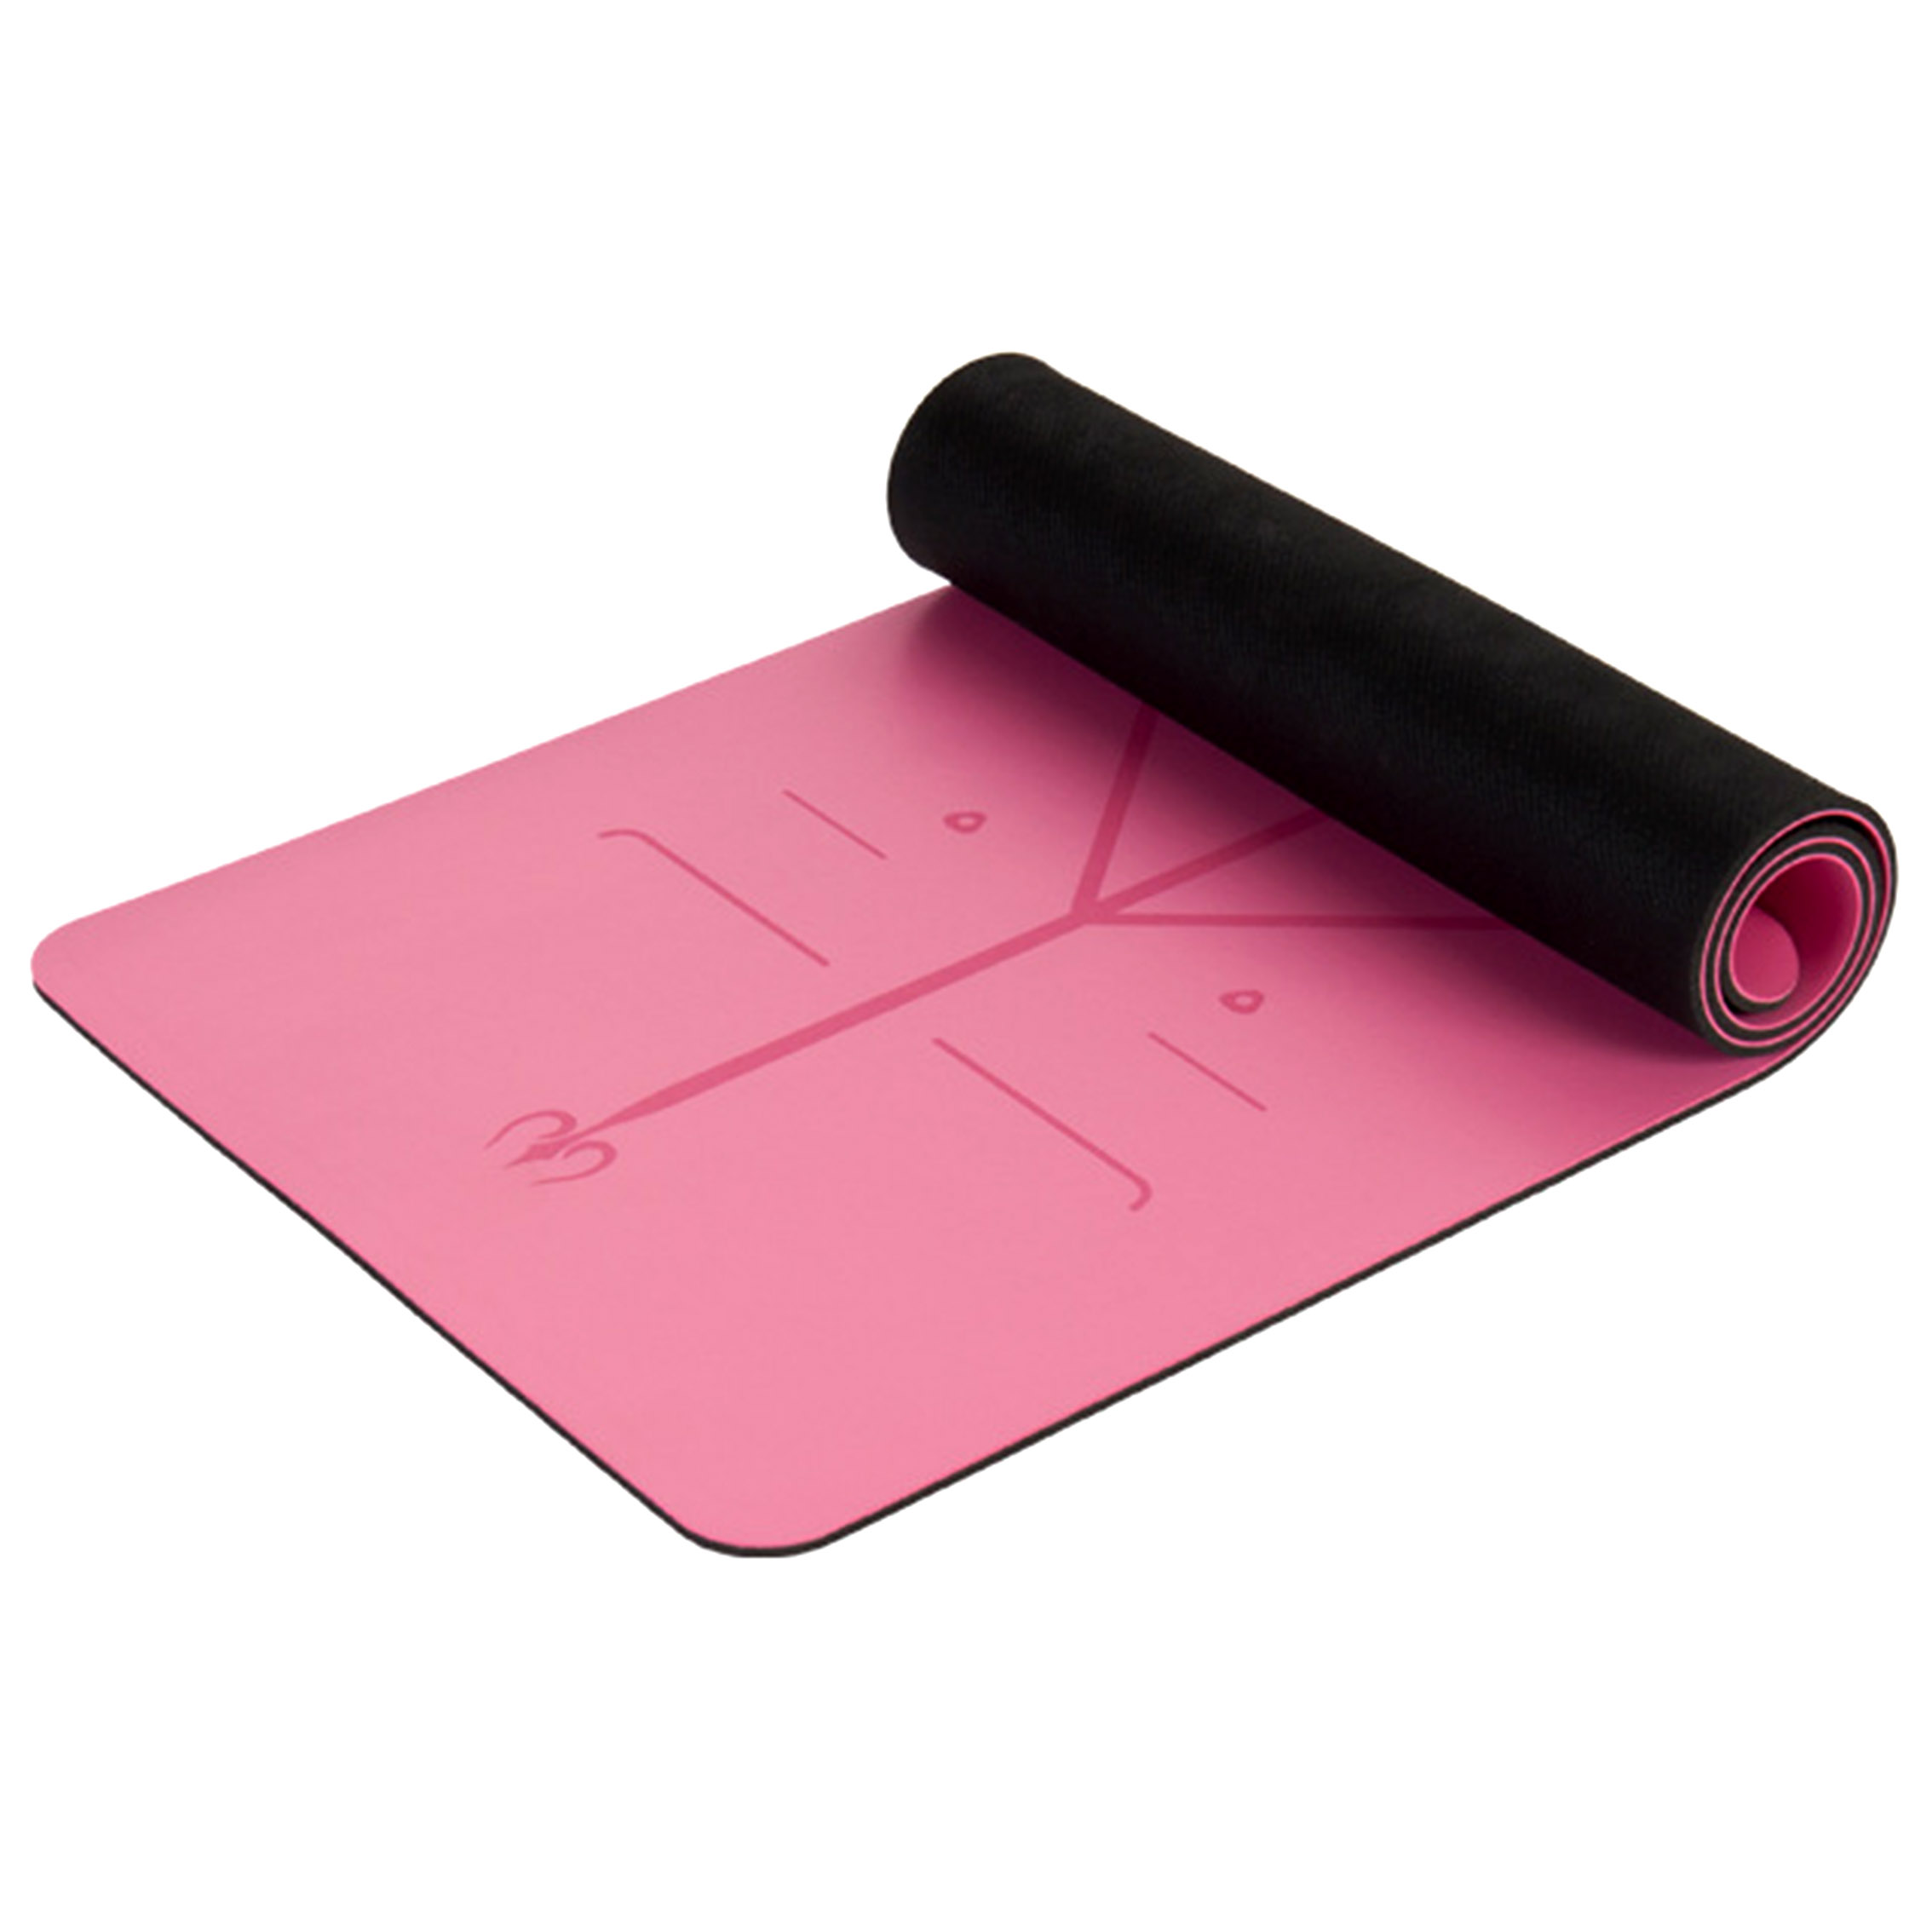 High quality 5mm Yoga Mats Eco Friendly Anti Slip Gym Fitness Exercise Natural Rubber pu Yoga Mat